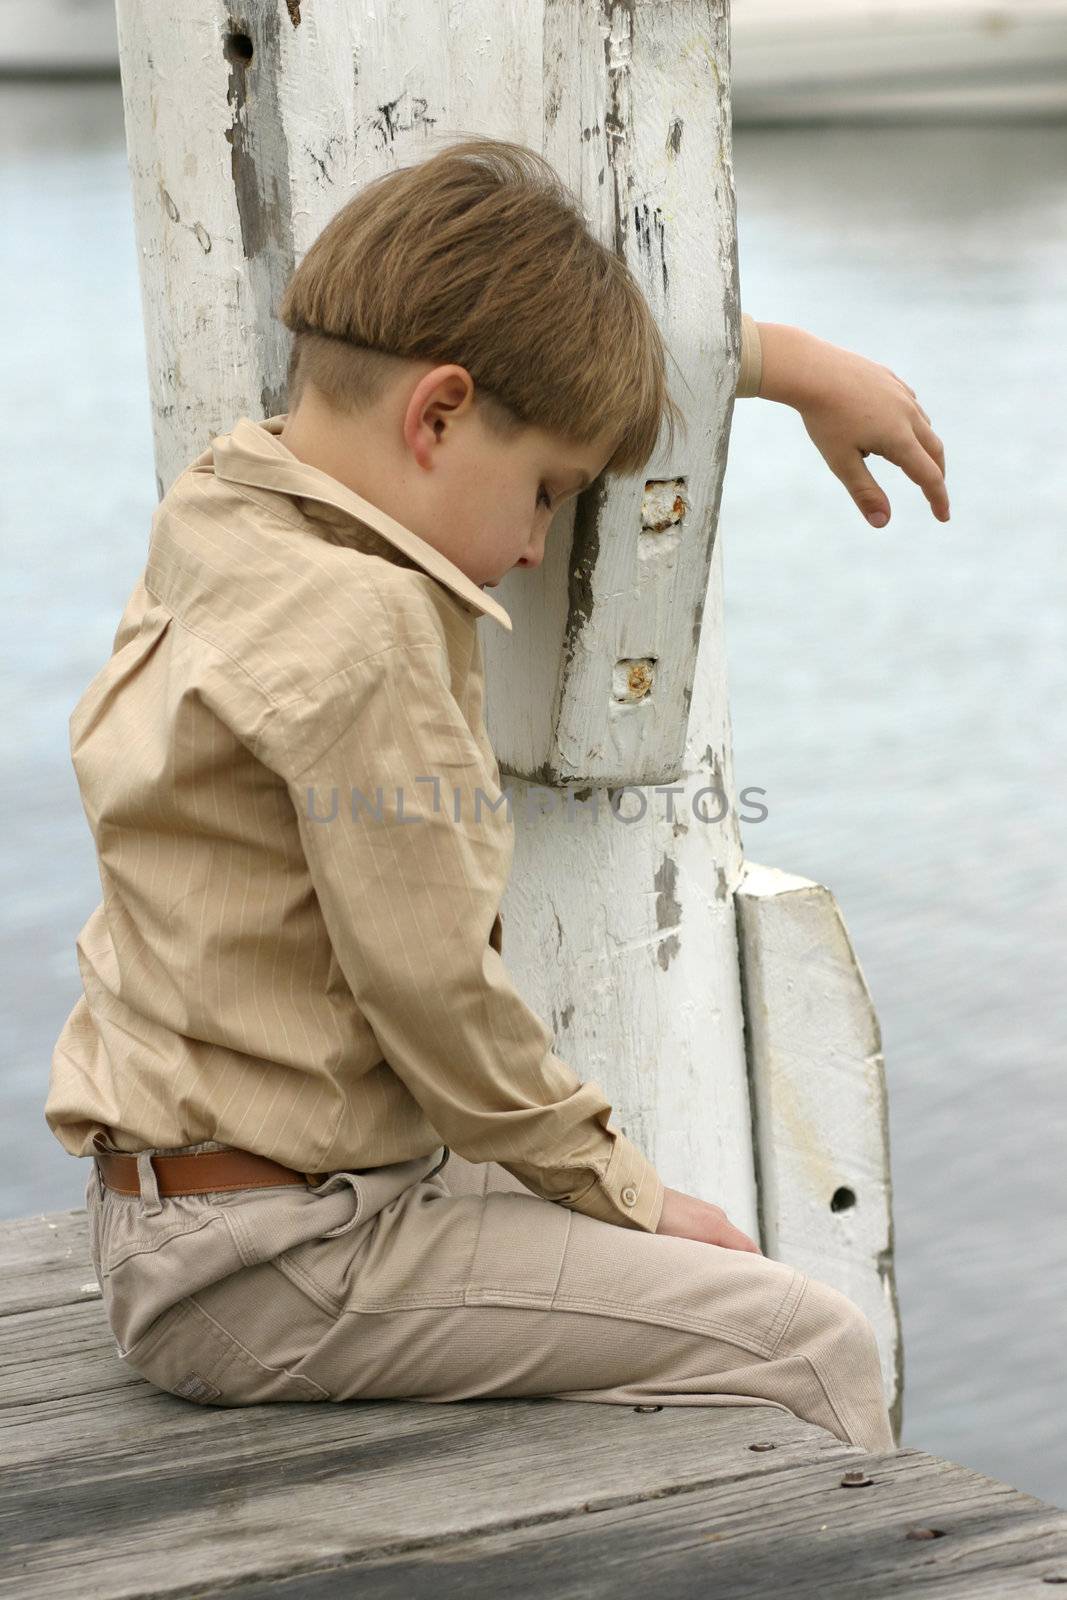 Grieving the loss of a loved one, dog/cat, etc.
Boy hangs head low grieving or lonely